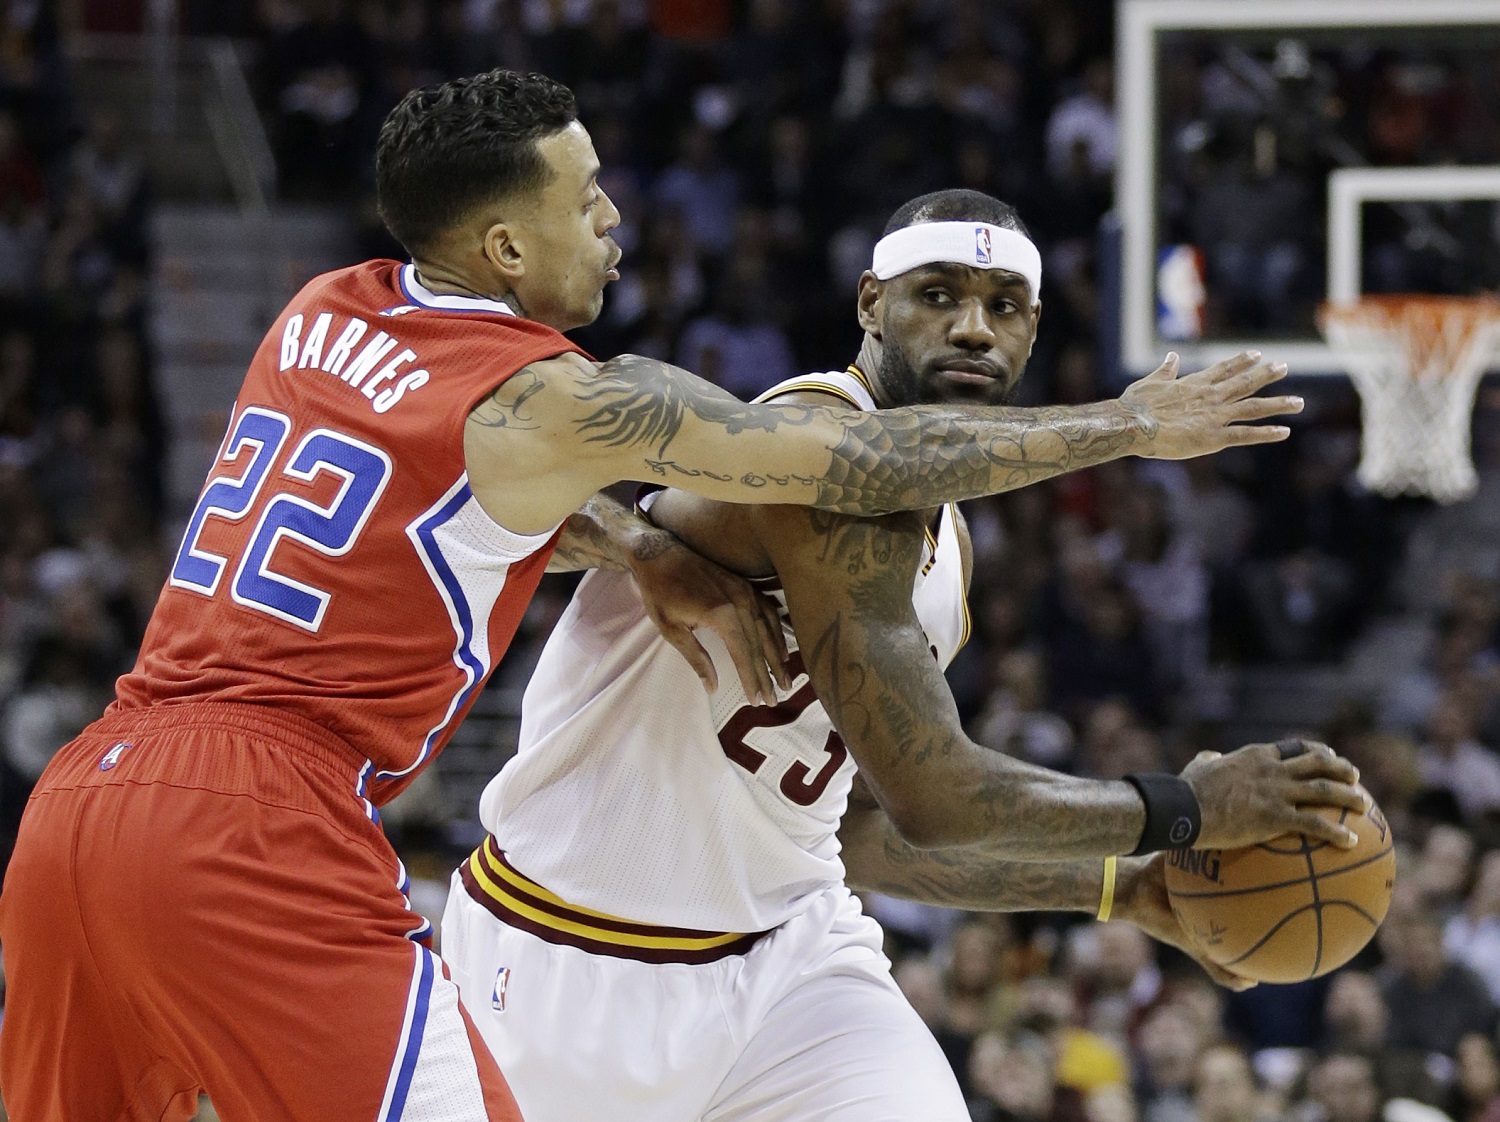 Cleveland Cavaliers' LeBron James (23) looks for a teammate under pressure from Los Angeles Clippers Matt Barnes (22) during an NBA basketball game Thursday, Feb. 5, 2015, in Cleveland. (AP Photo/Tony Dejak)